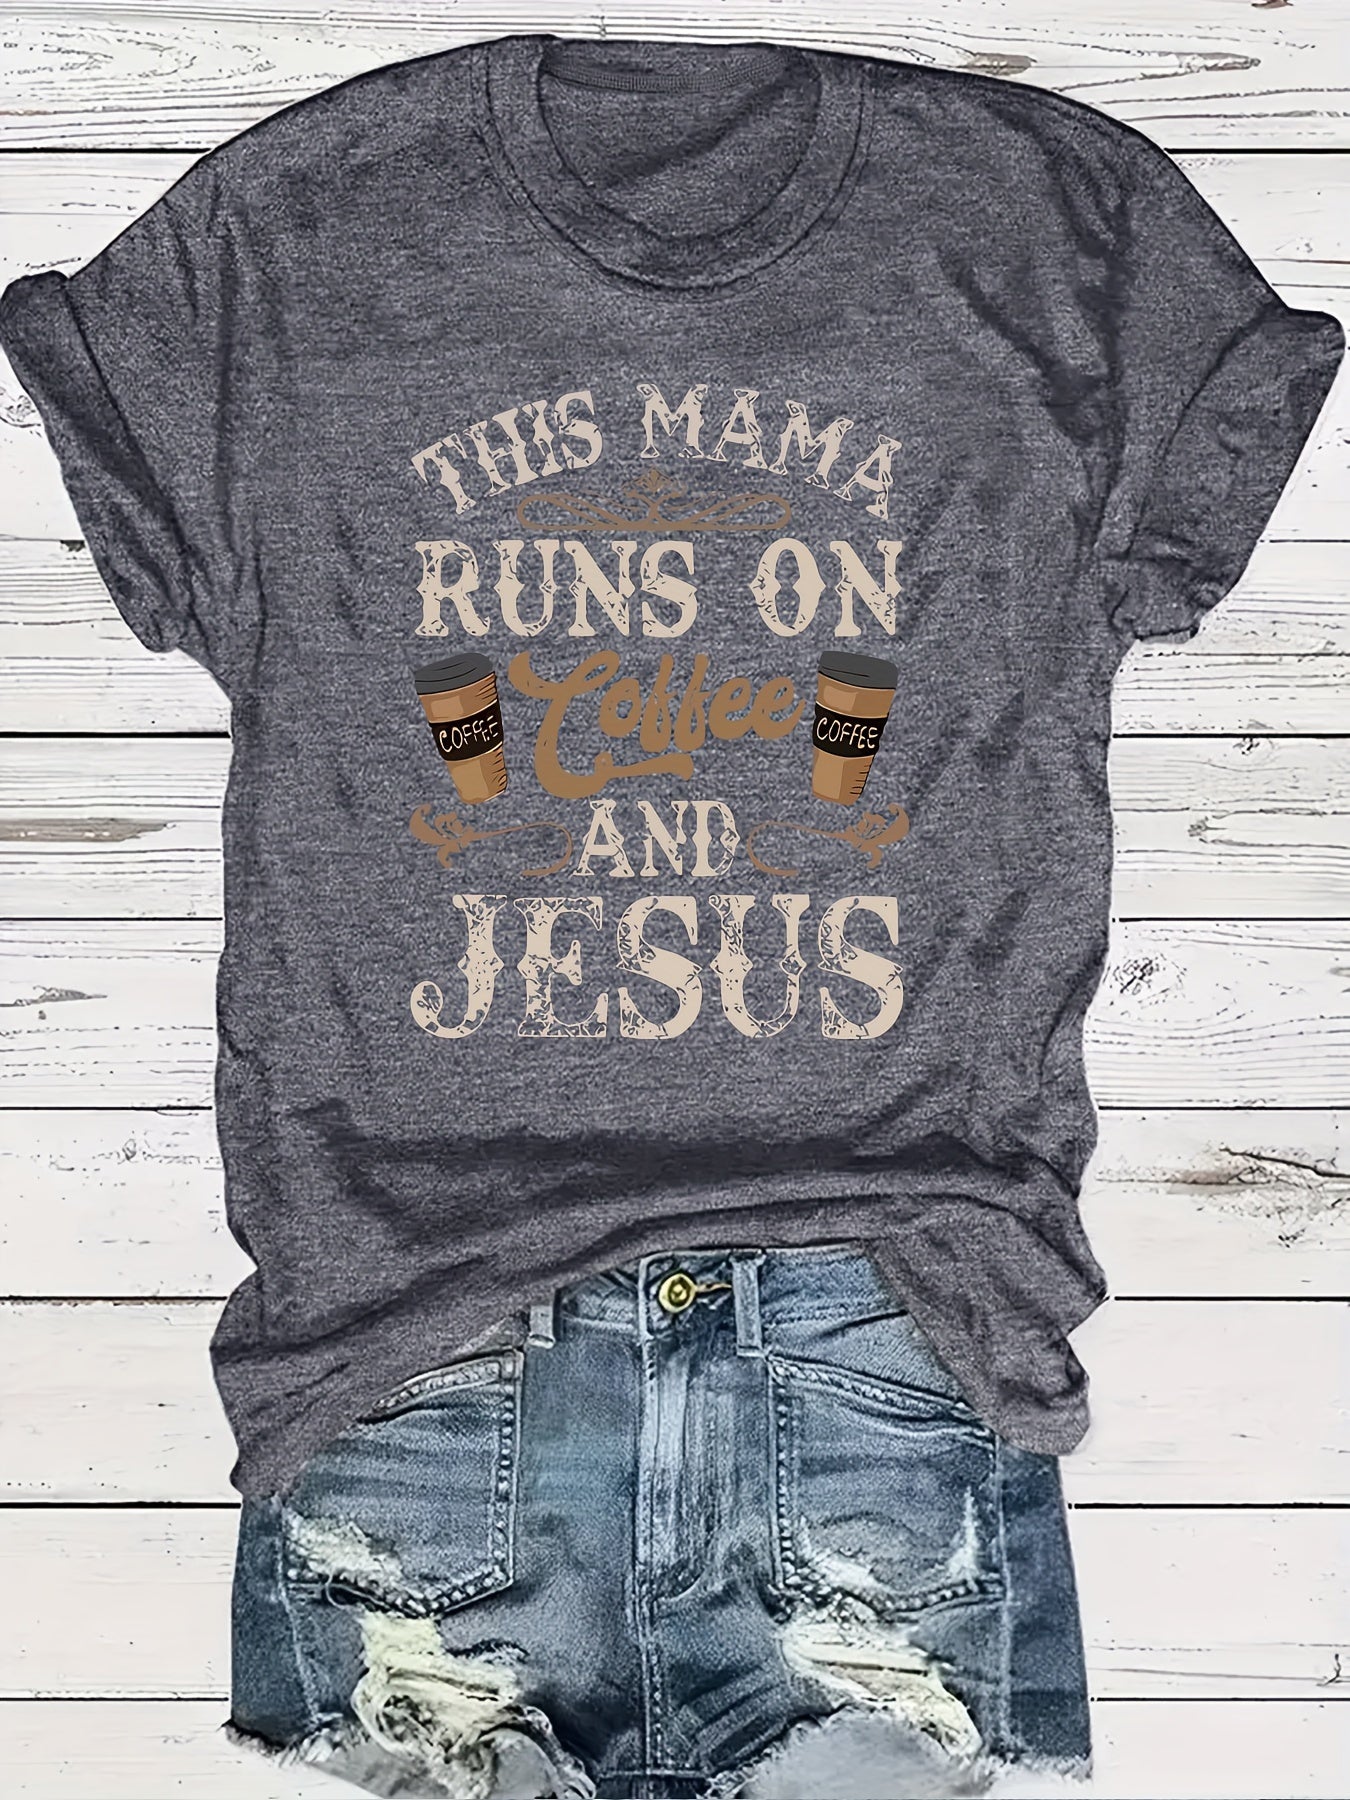 This Mama Runs On coffee And Jesus Plus Size Women's Christian T-shirt claimedbygoddesigns